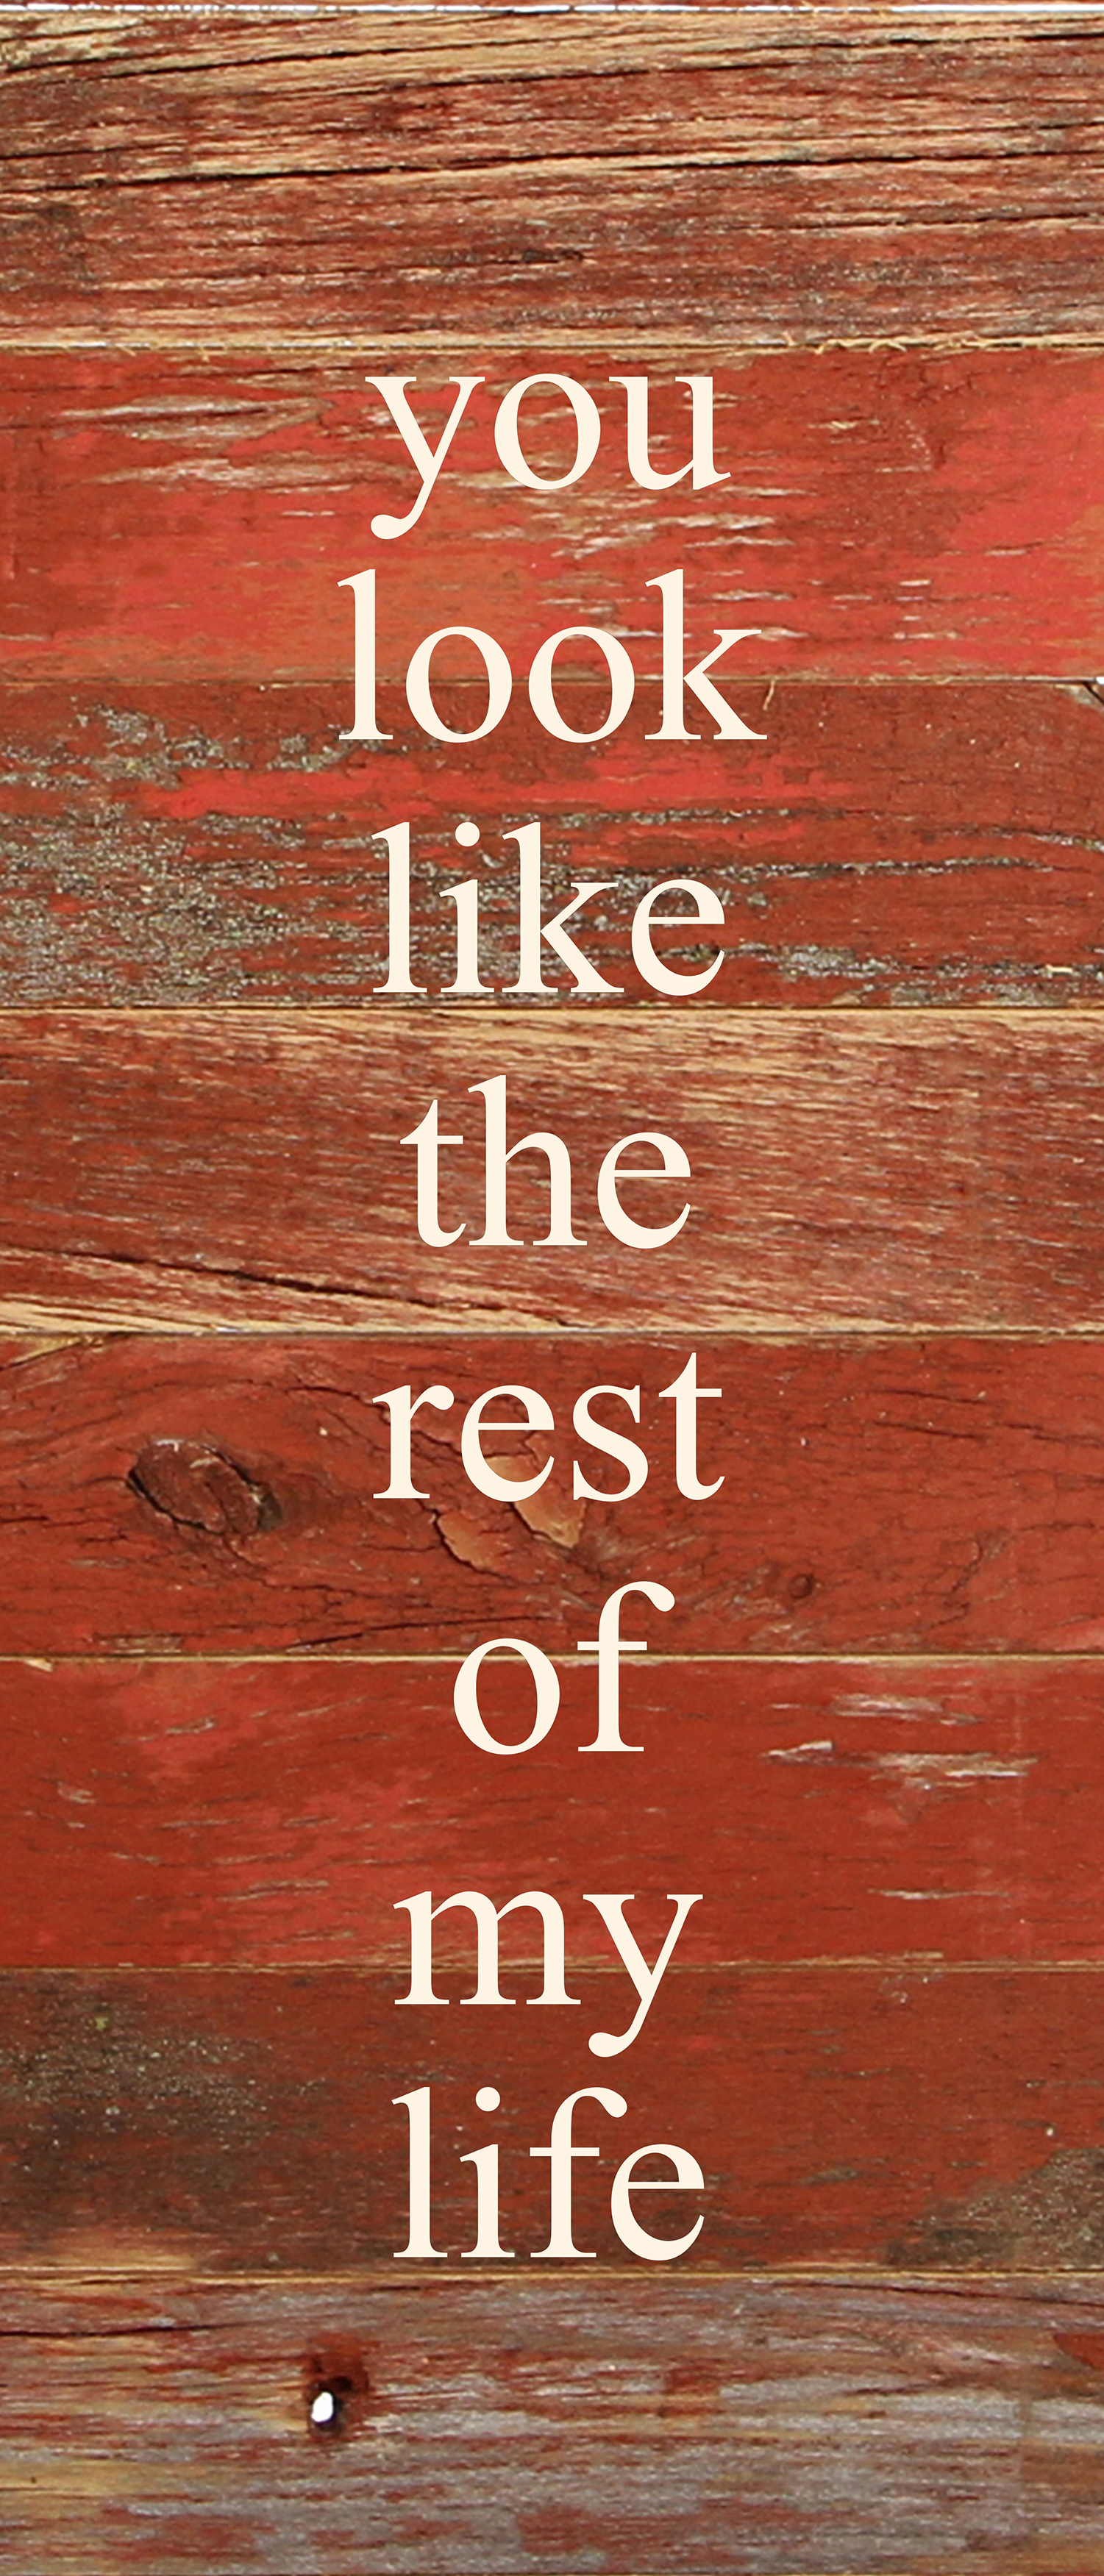 You look like the rest of my life. / 6"x14" Reclaimed Wood Sign